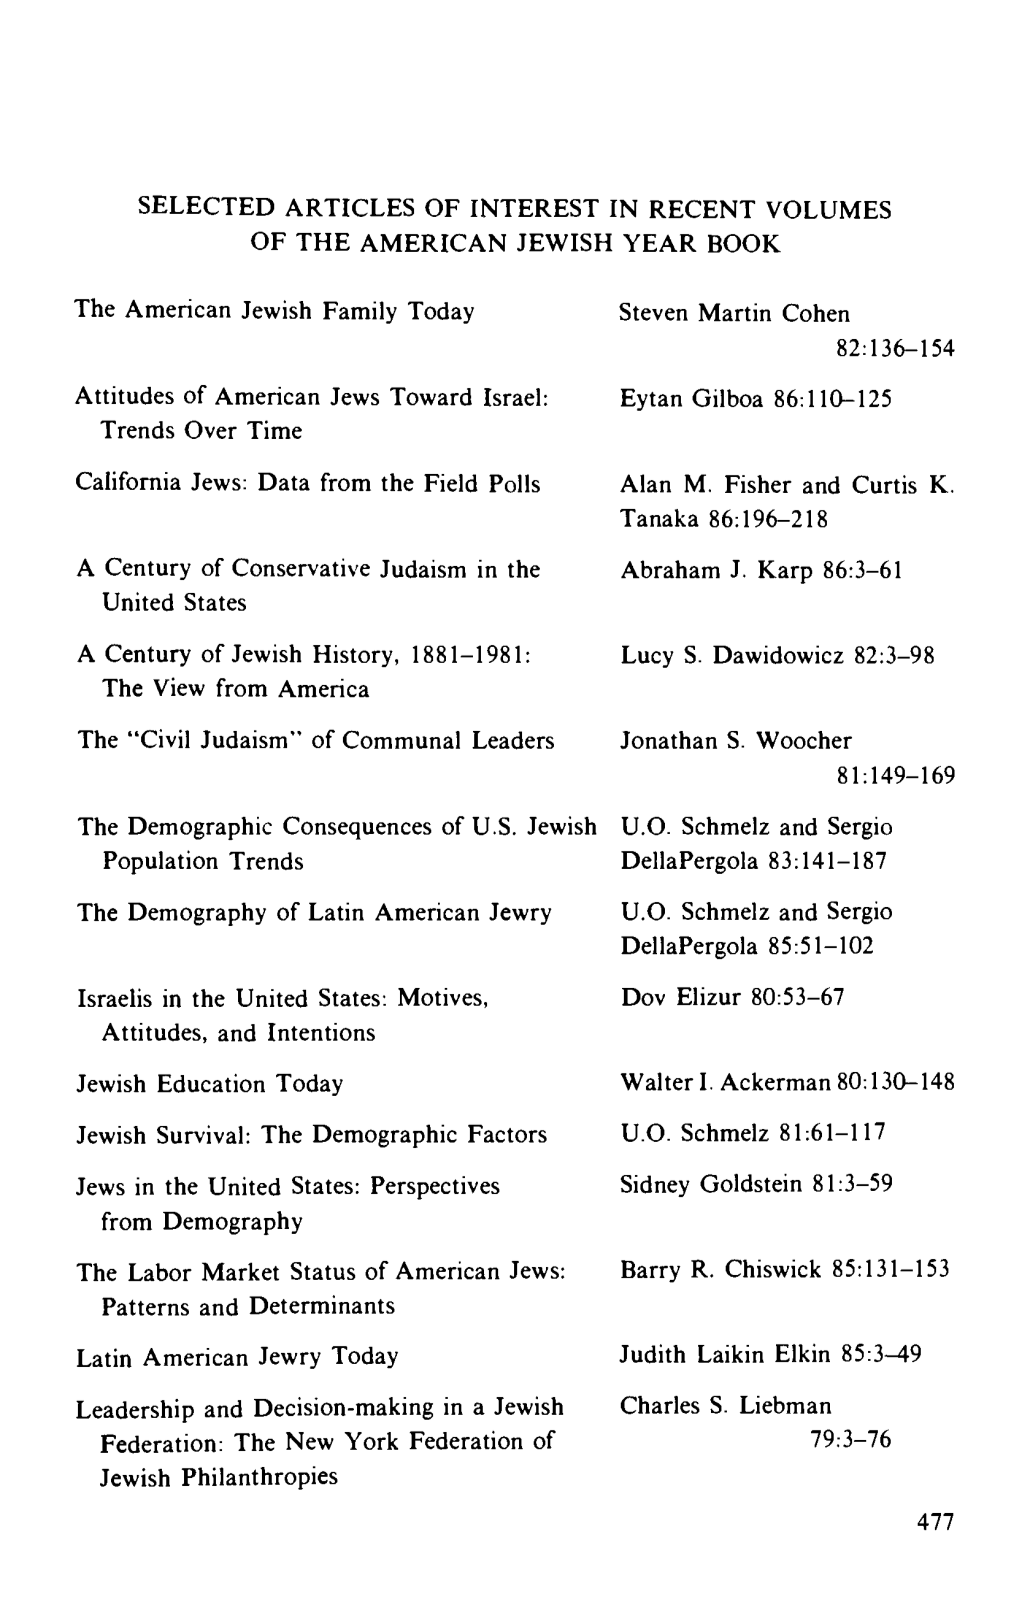 Selected Articles of Interest in Recent Volumes of the American Jewish Year Book